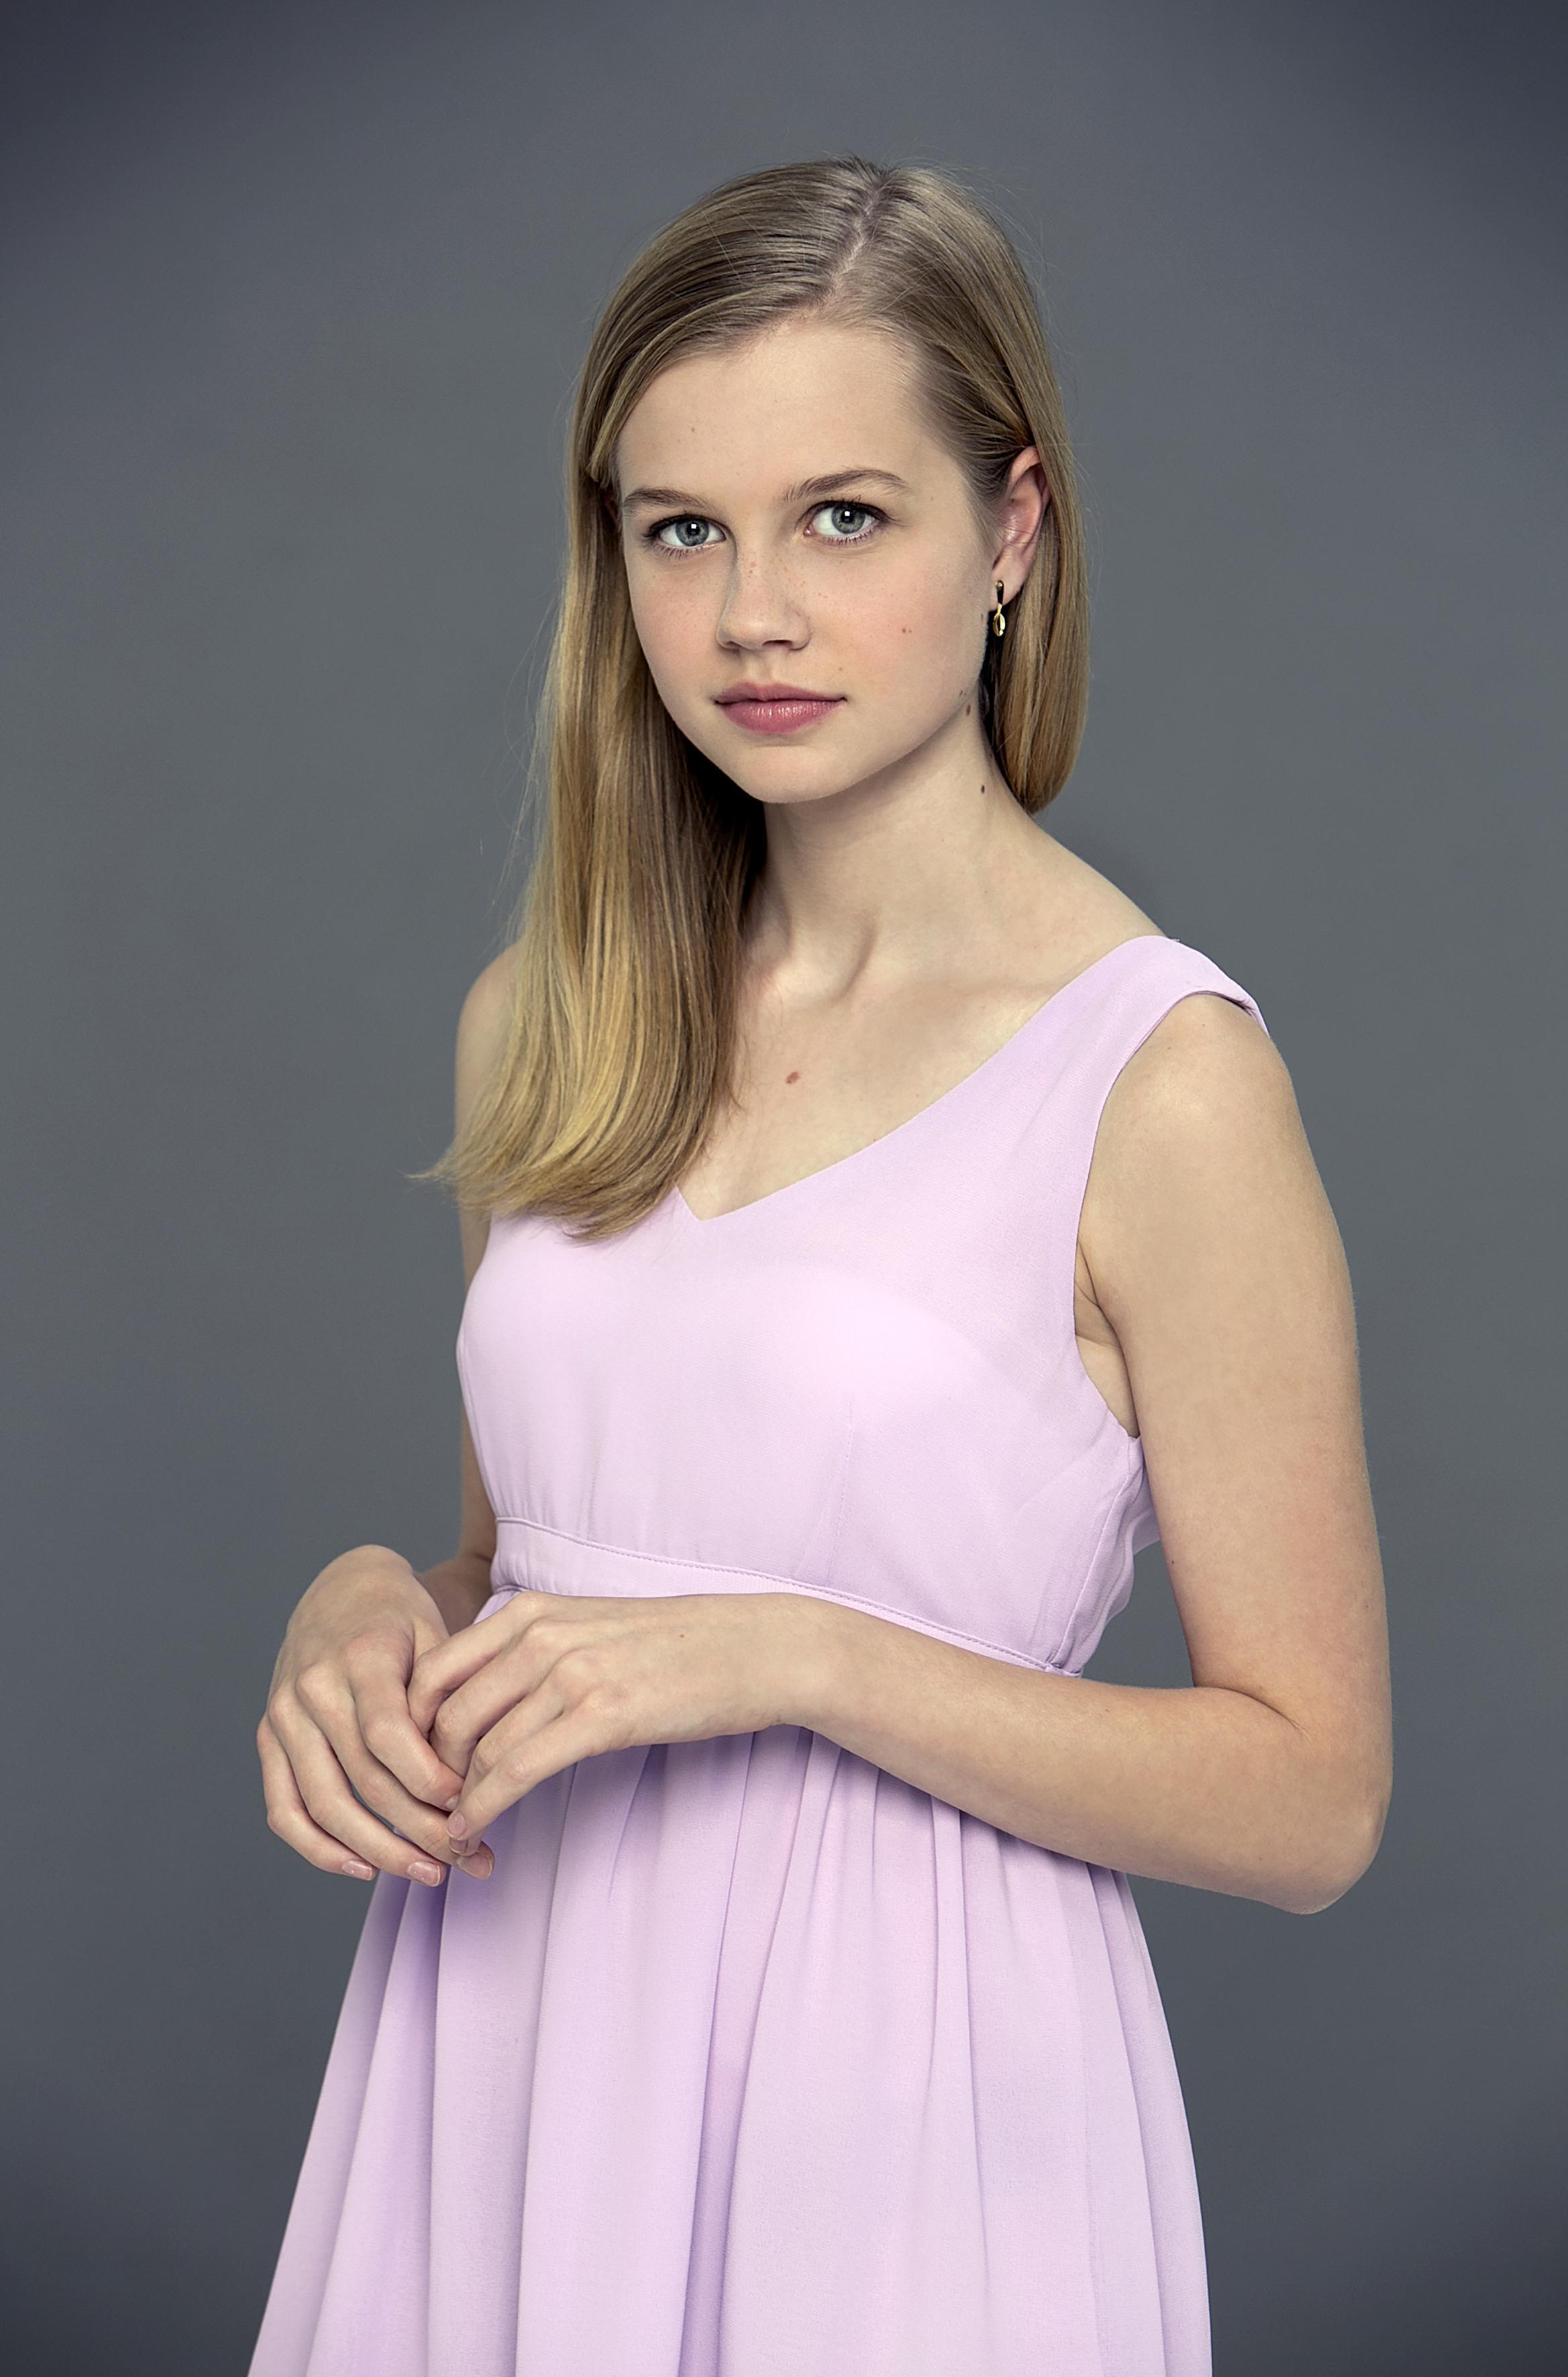 Angourie Rice Wallpapers